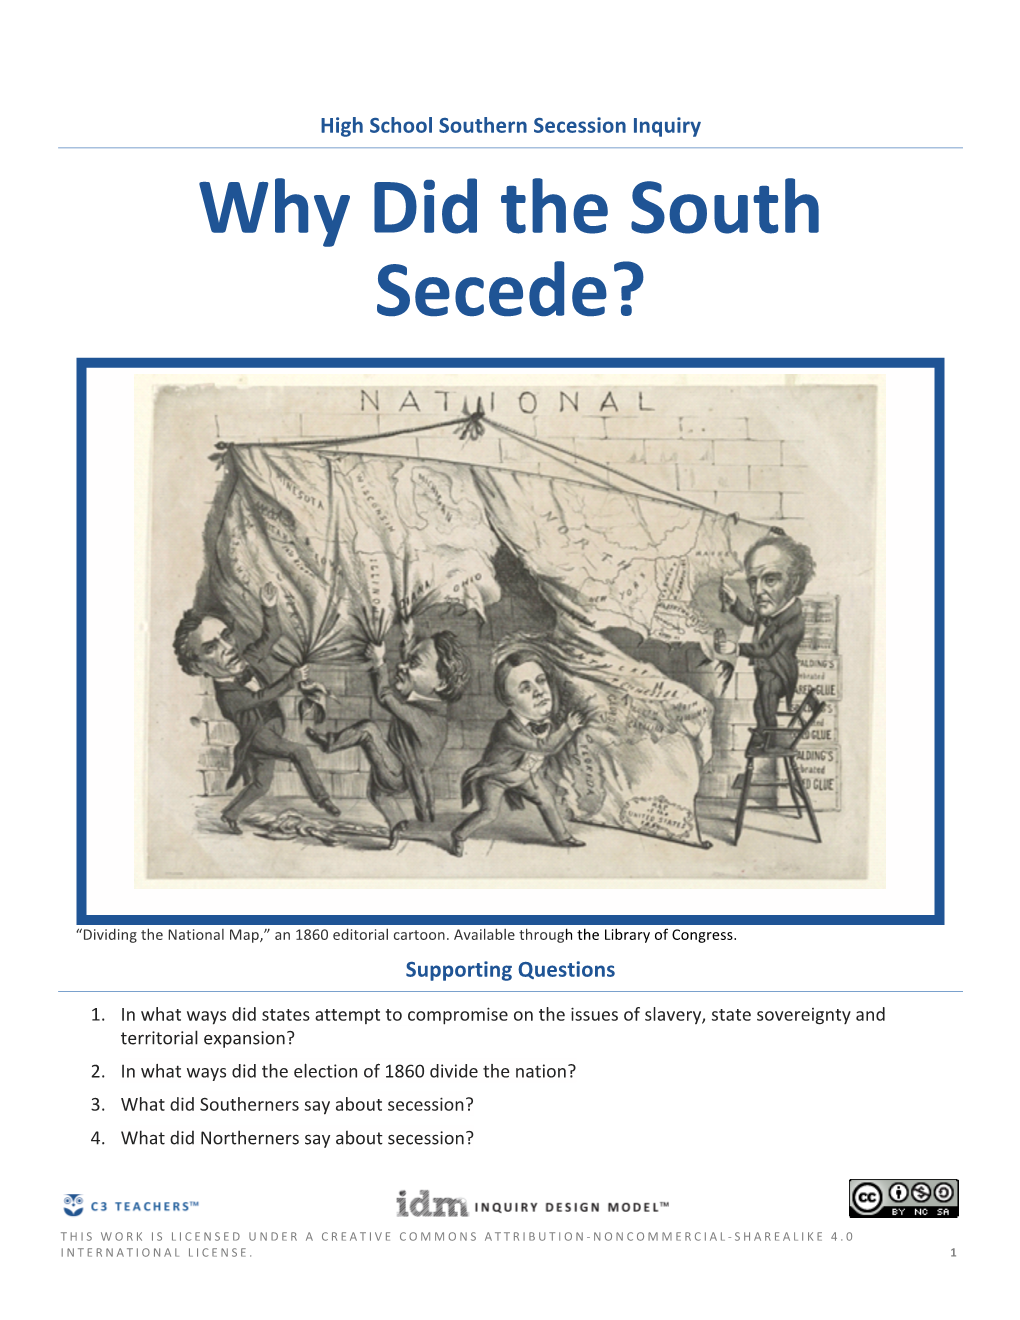 Why Did the South Secede?